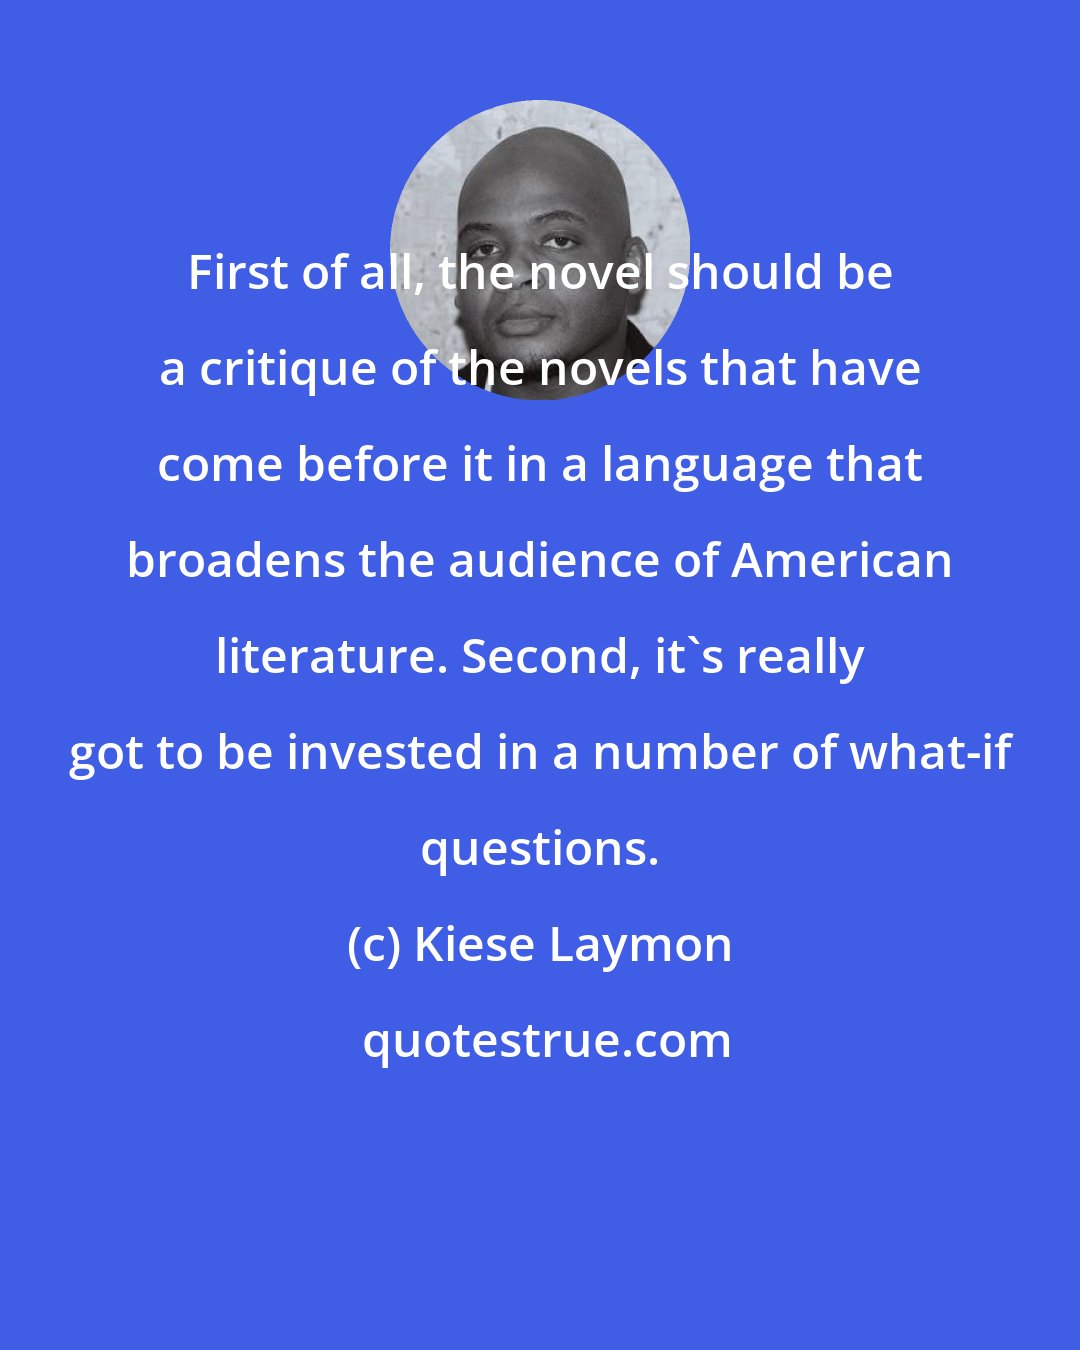 Kiese Laymon: First of all, the novel should be a critique of the novels that have come before it in a language that broadens the audience of American literature. Second, it's really got to be invested in a number of what-if questions.